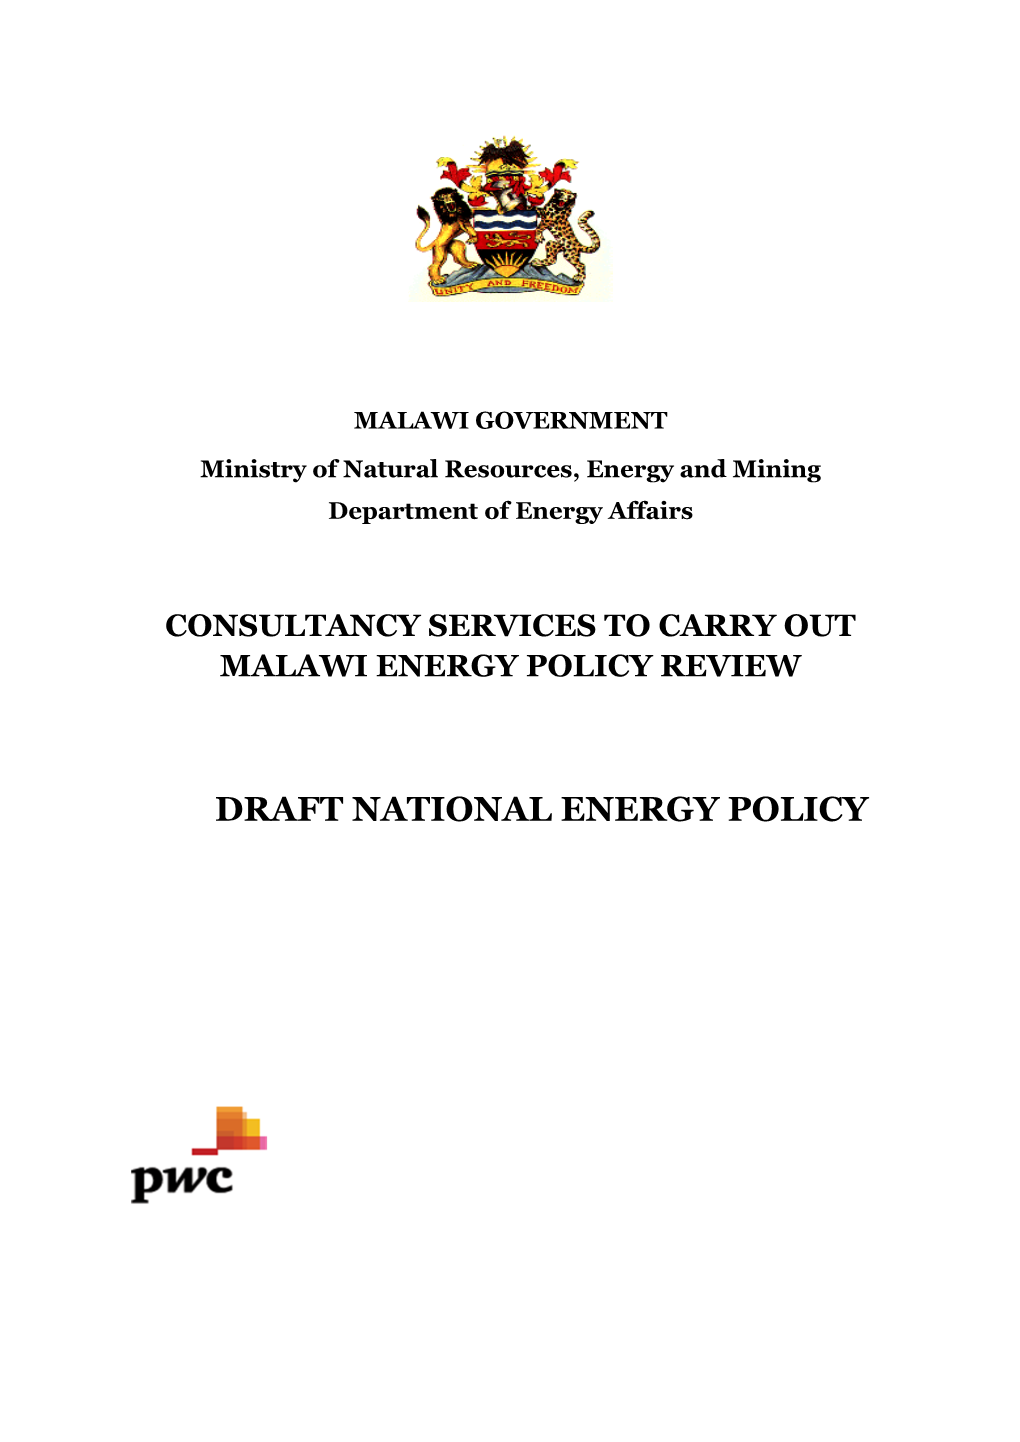 Draft National Energy Policy